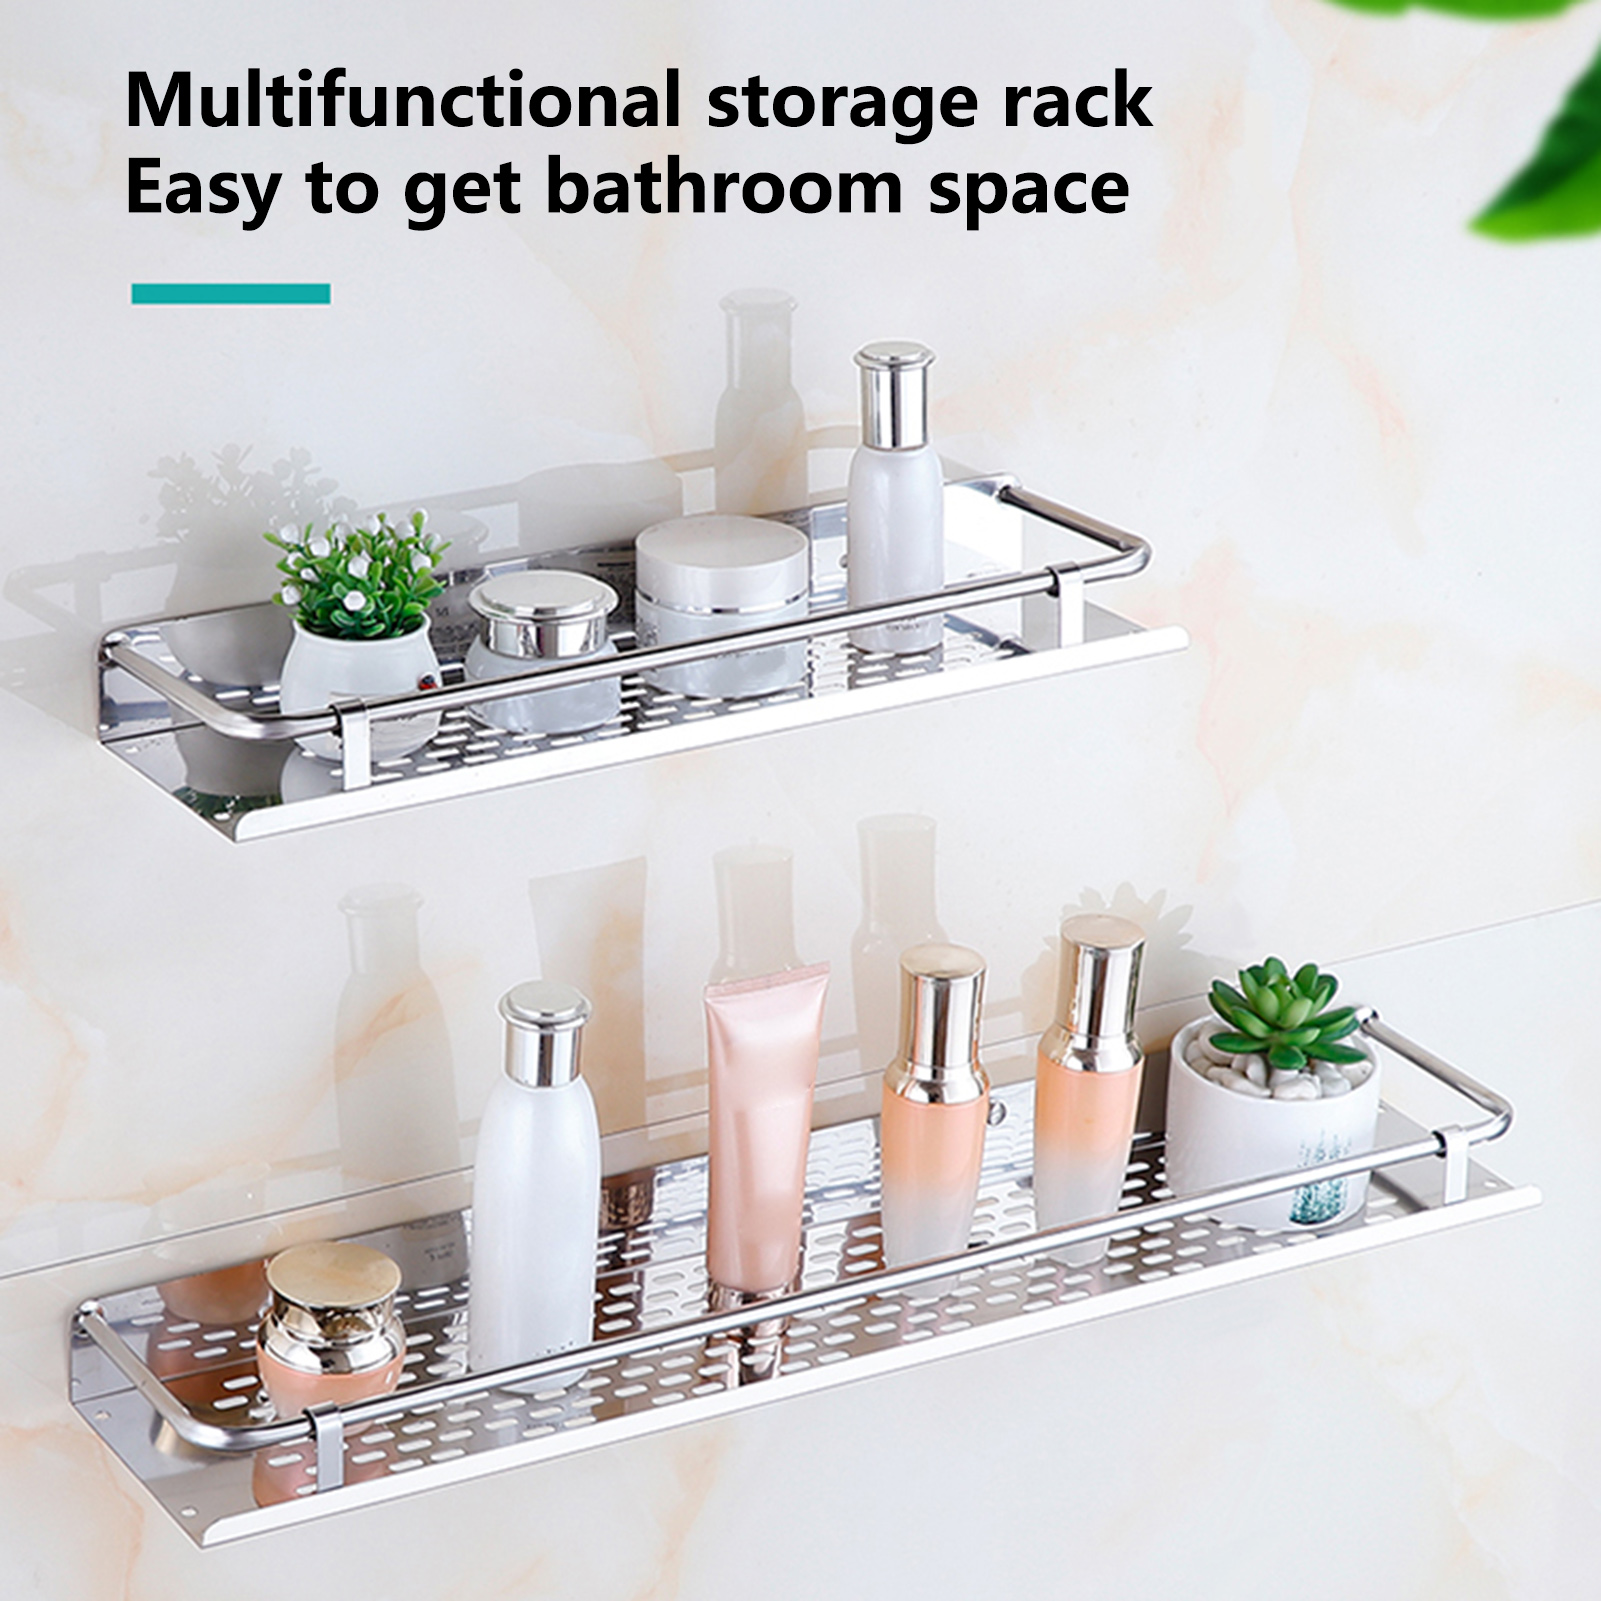 Hesroicy Bathroom Storage Shelf Wall-Mounted, Strong Load-Bearing,  Punch-Free, Corrosion-Resistant with Fence, Stainless Steel Kitchen and Bathroom  Storage Rack, Wall Shelf for Bathroom Supplies